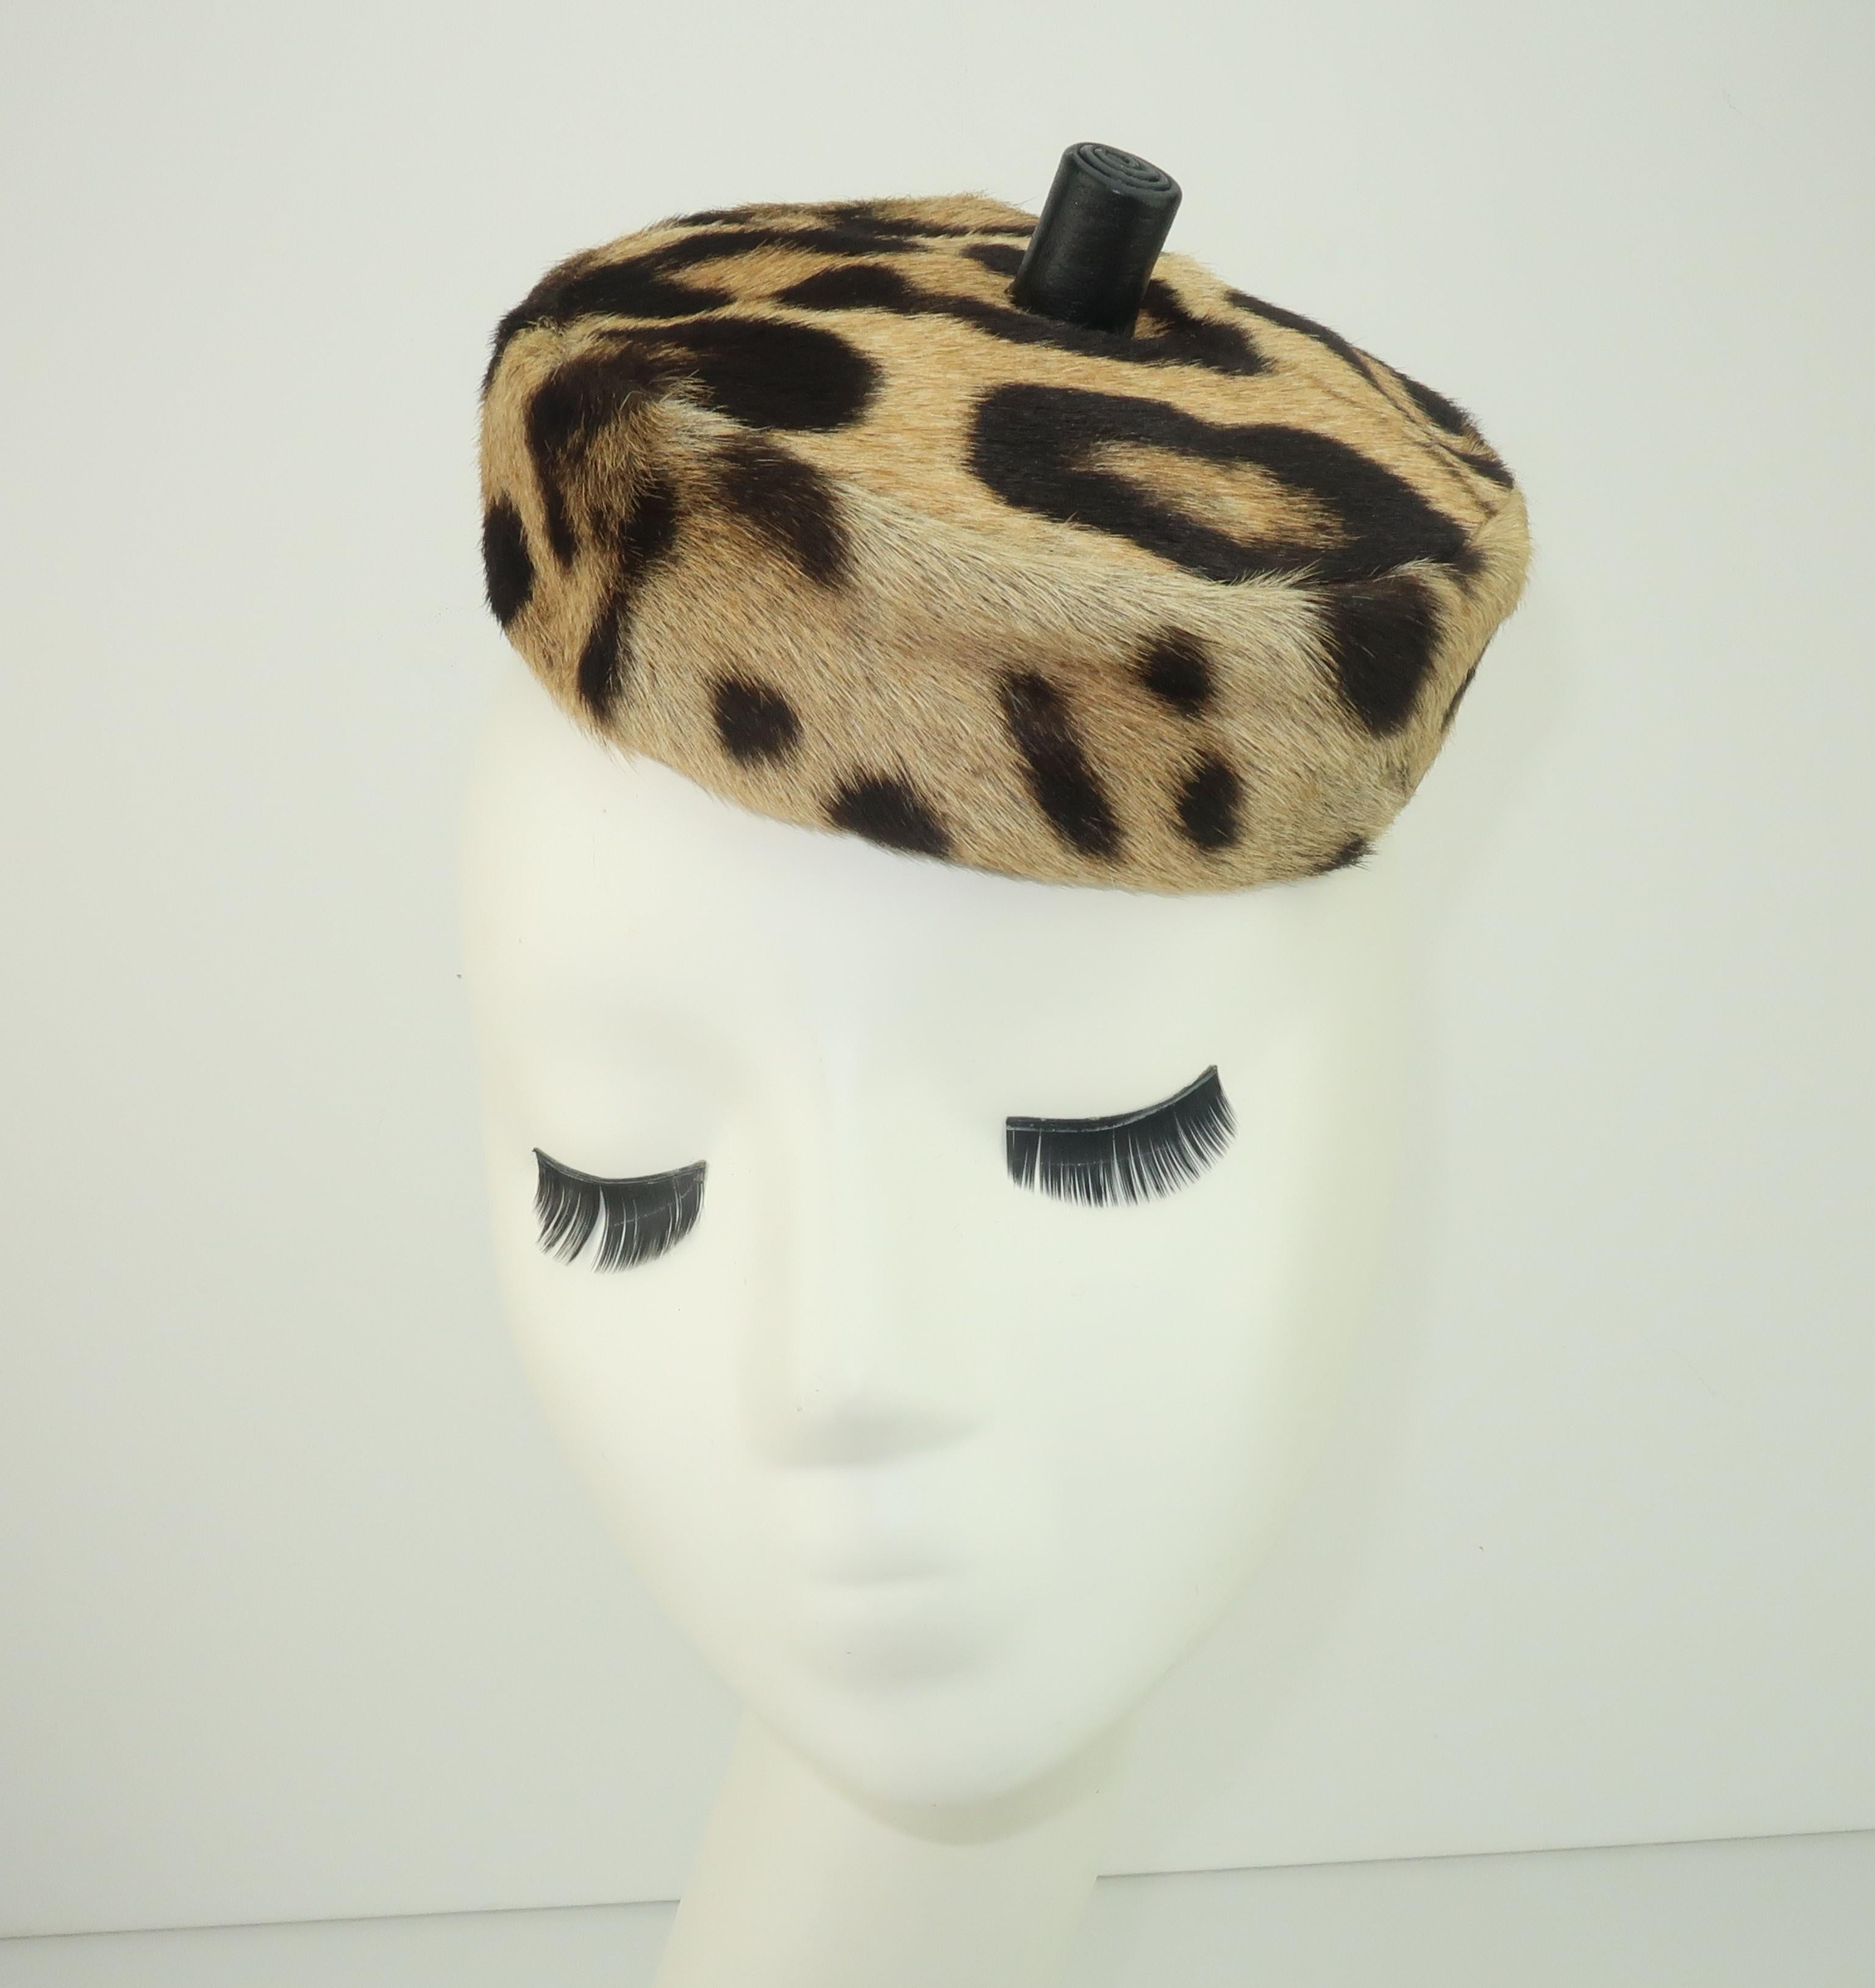 Add a chic exotic flavor to your wardrobe with this fashionable leopard print fur pillbox hat with a black leather finial from Saks Fifth Avenue.  This minimalist shape can be worn forward, back or cocked to one side like a tilt hat.  Lined with